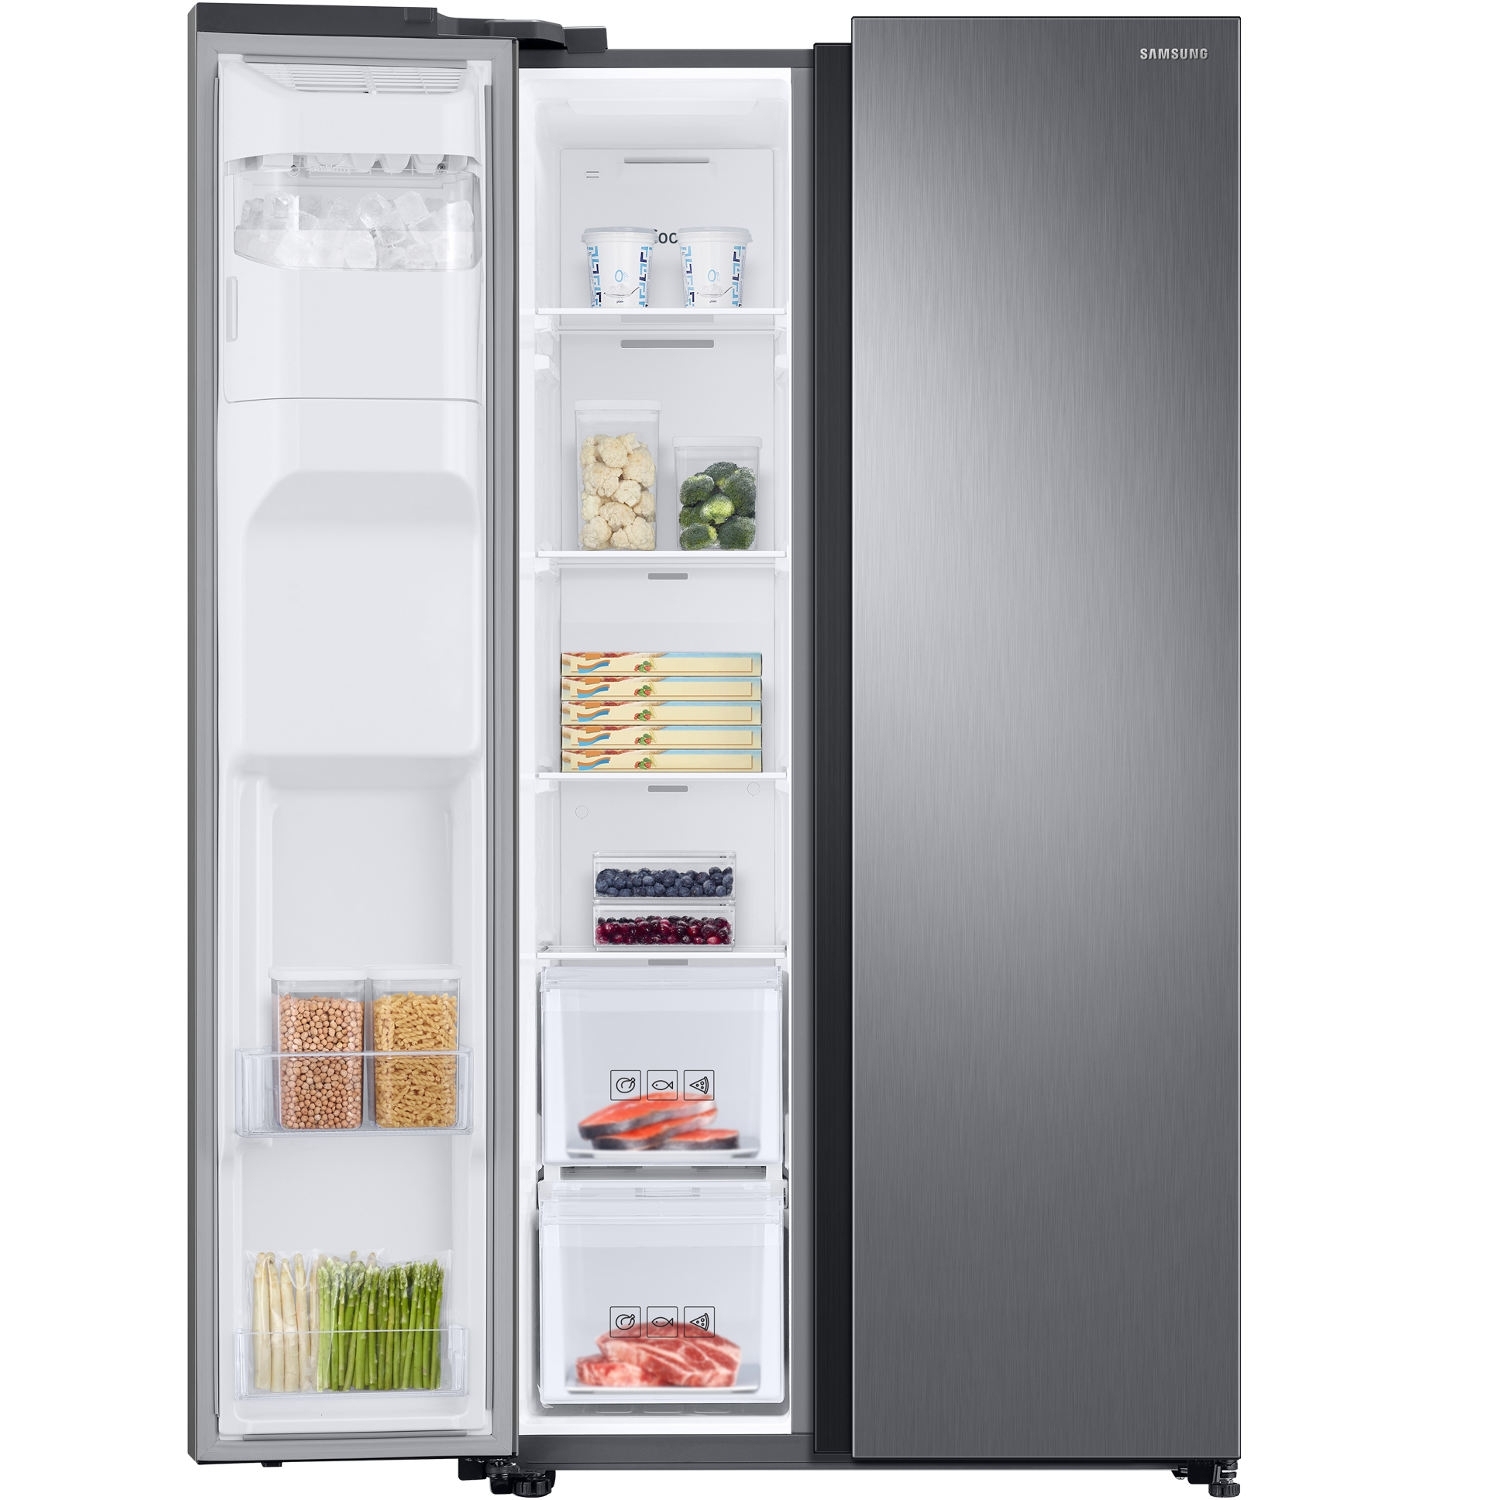 Samsung American Style Fridge Freezer - Silver - A+ Rated - 1